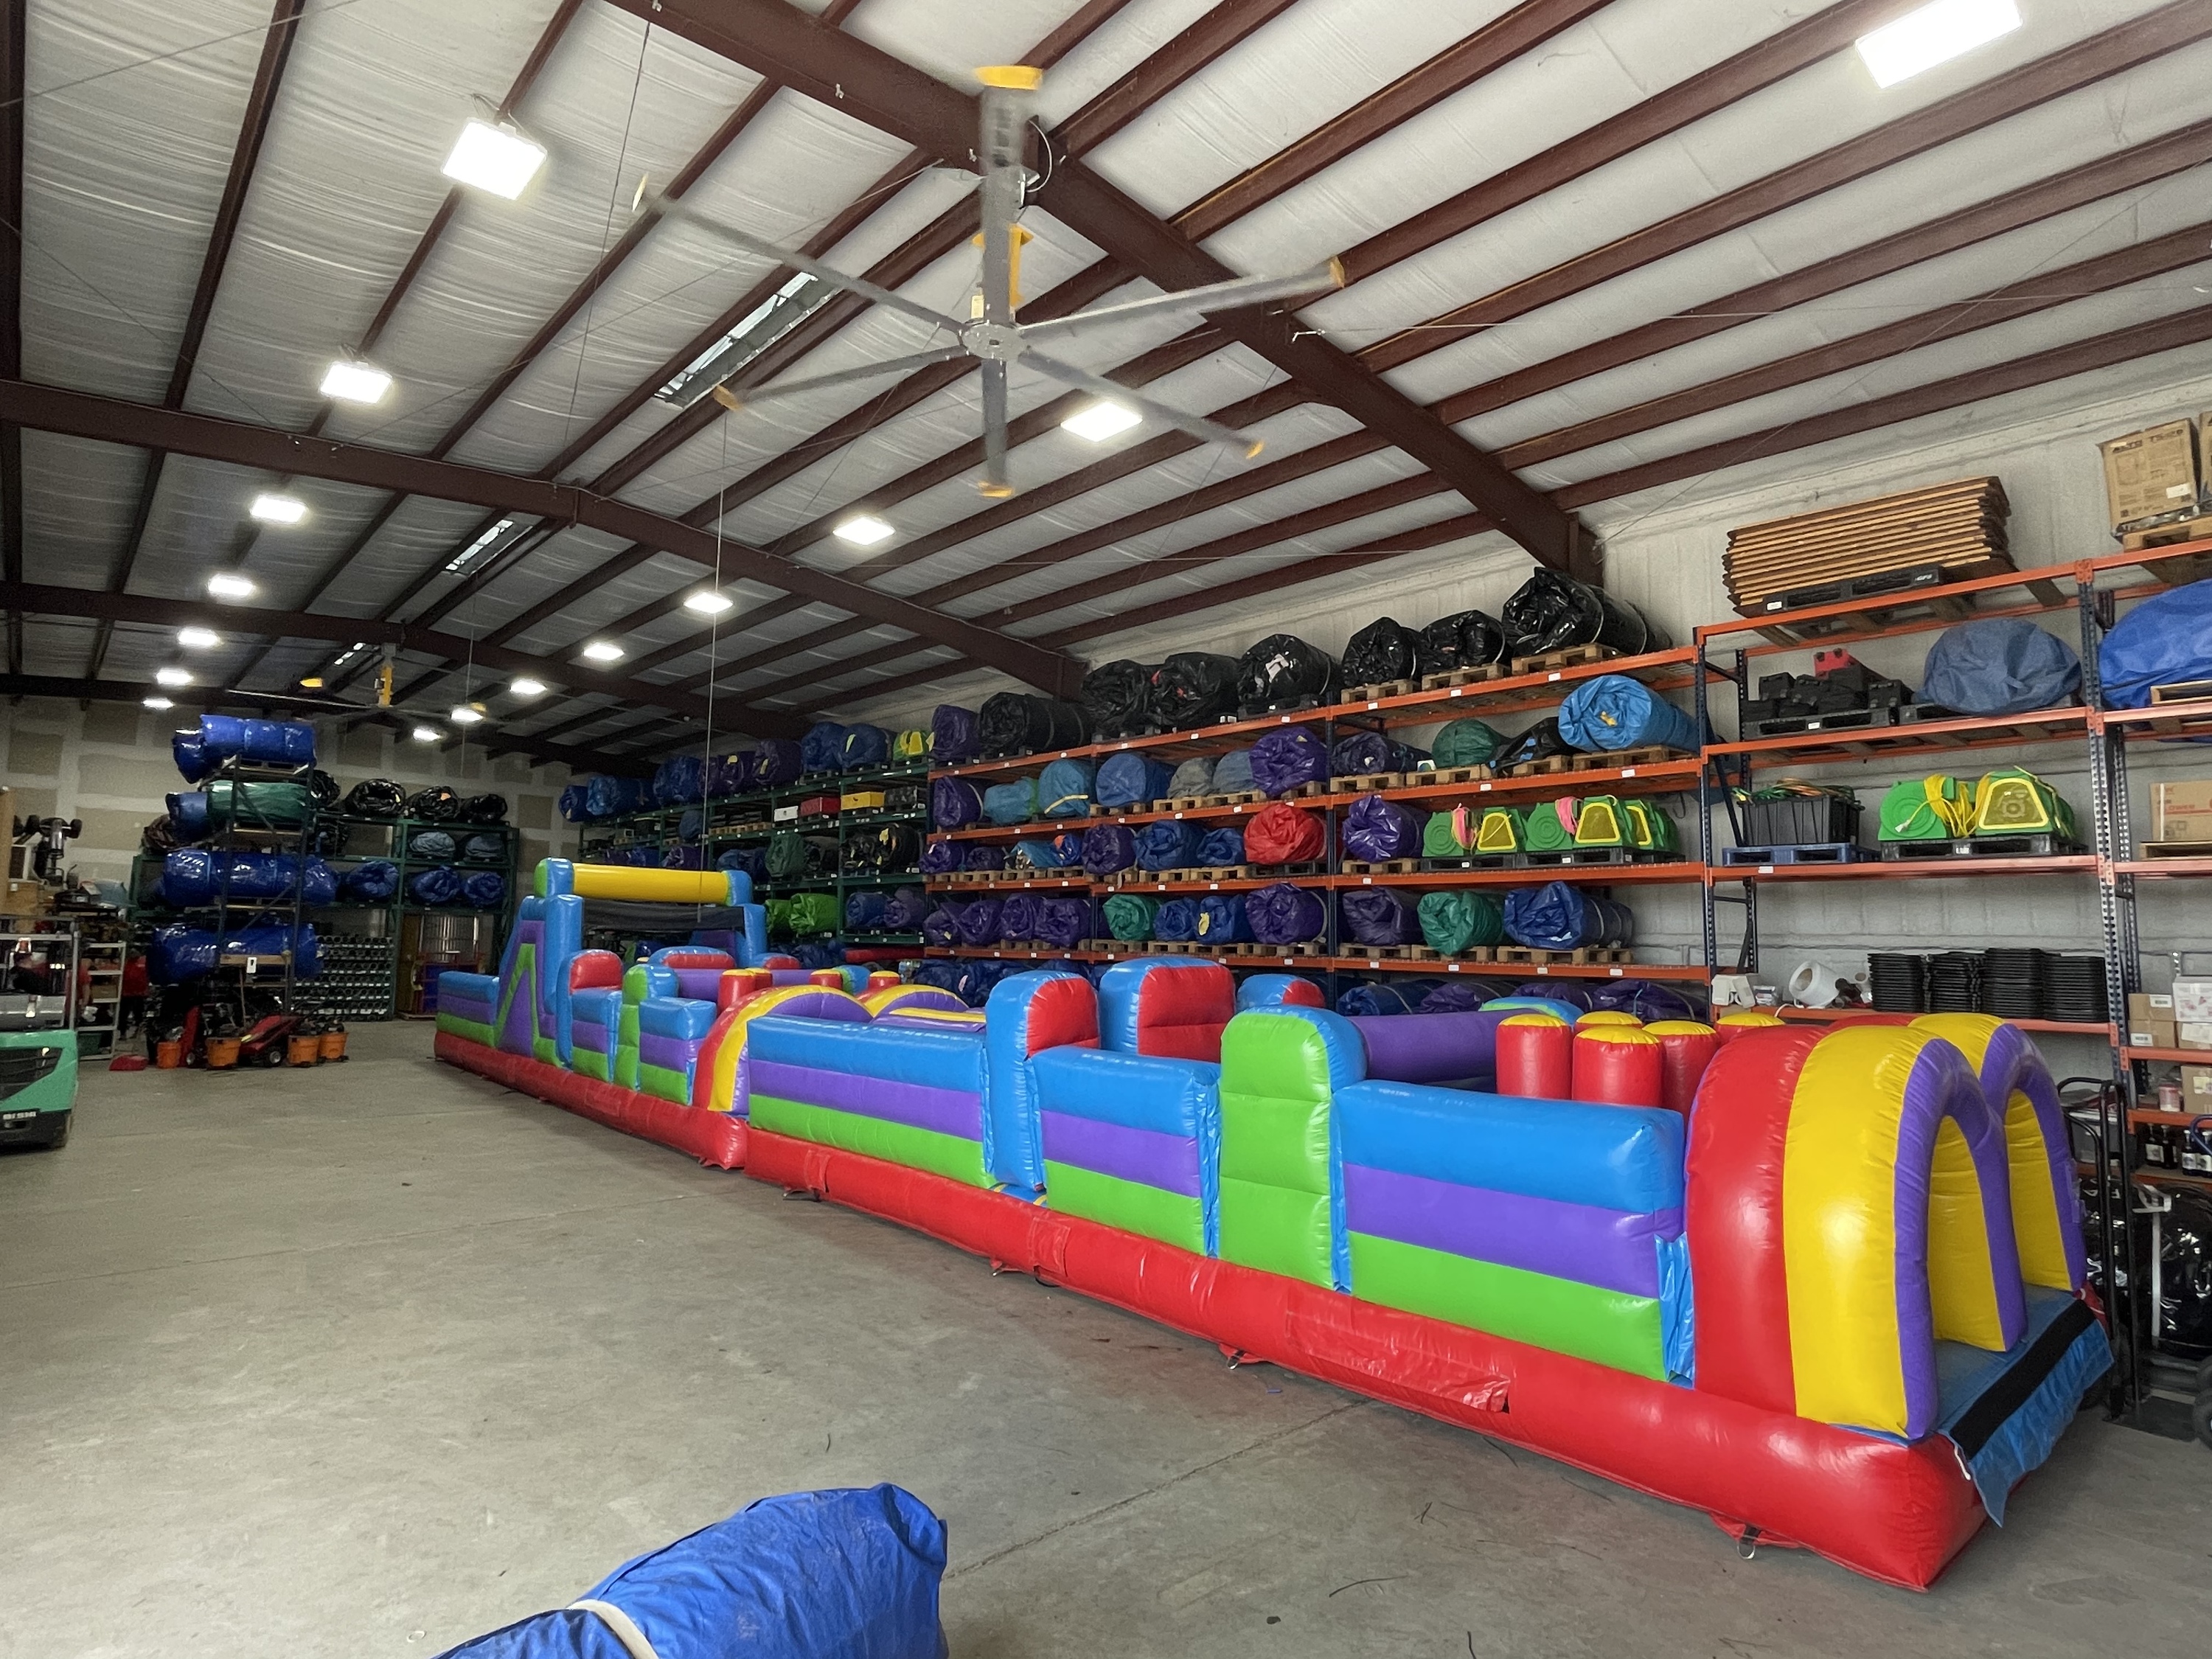 70 ft. Obstacle course rental